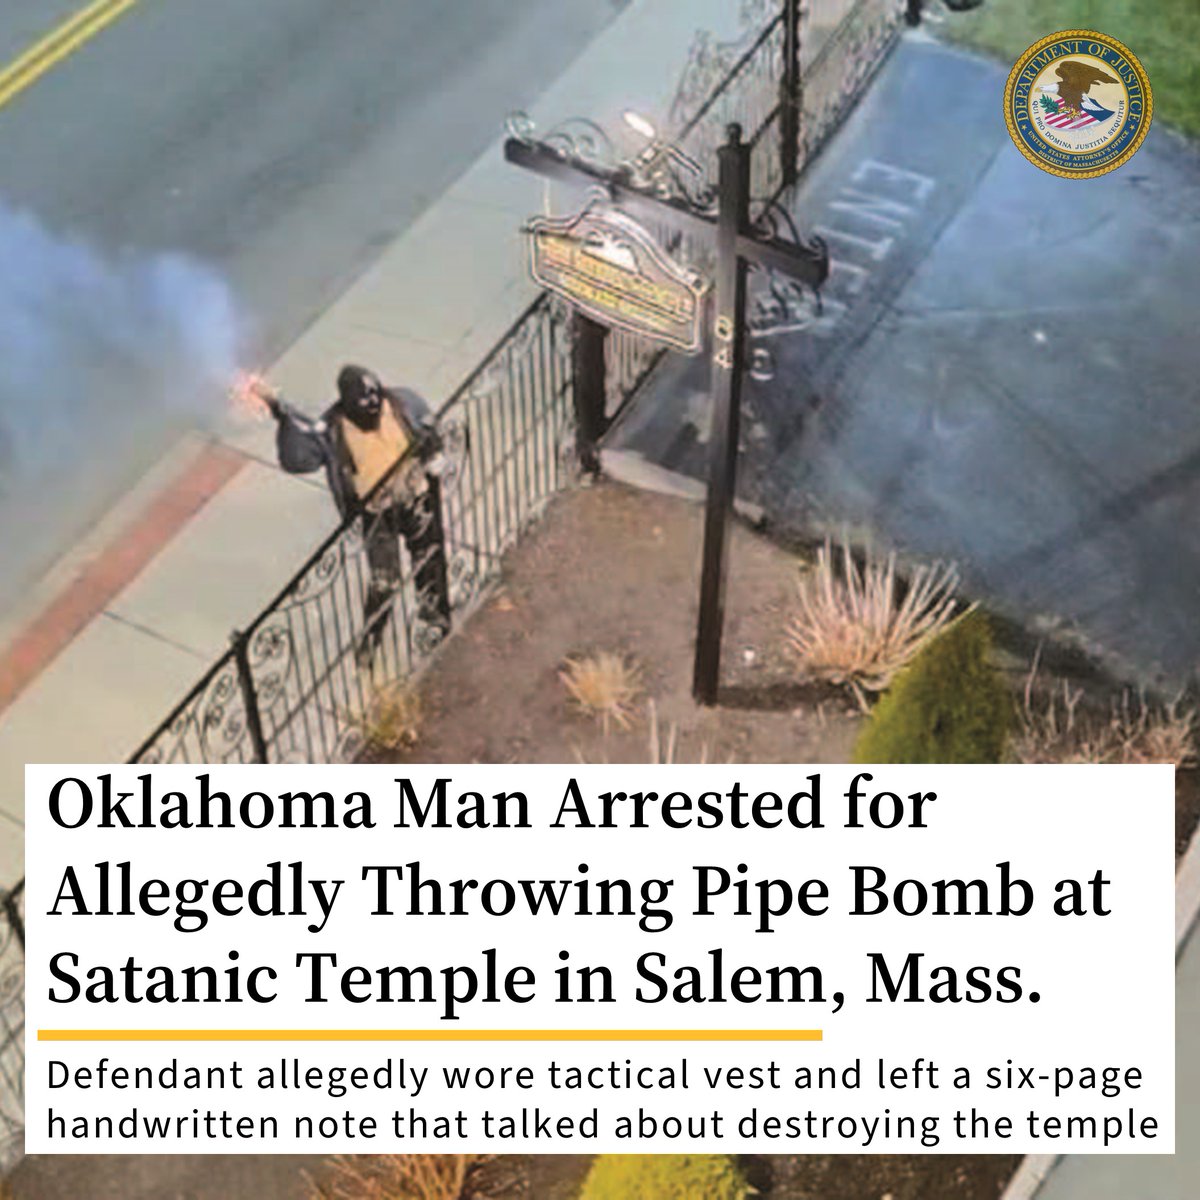 #ICYMI an Oklahoma man has been arrested for allegedly throwing a pipe bomb at the Satanic Temple in Salem, Mass. at 4am on April 8. The pipe bomb partially detonated, causing a minor fire and related damage to the building's exterior. @USAO_WDOK 🔗justice.gov/usao-ma/pr/okl…